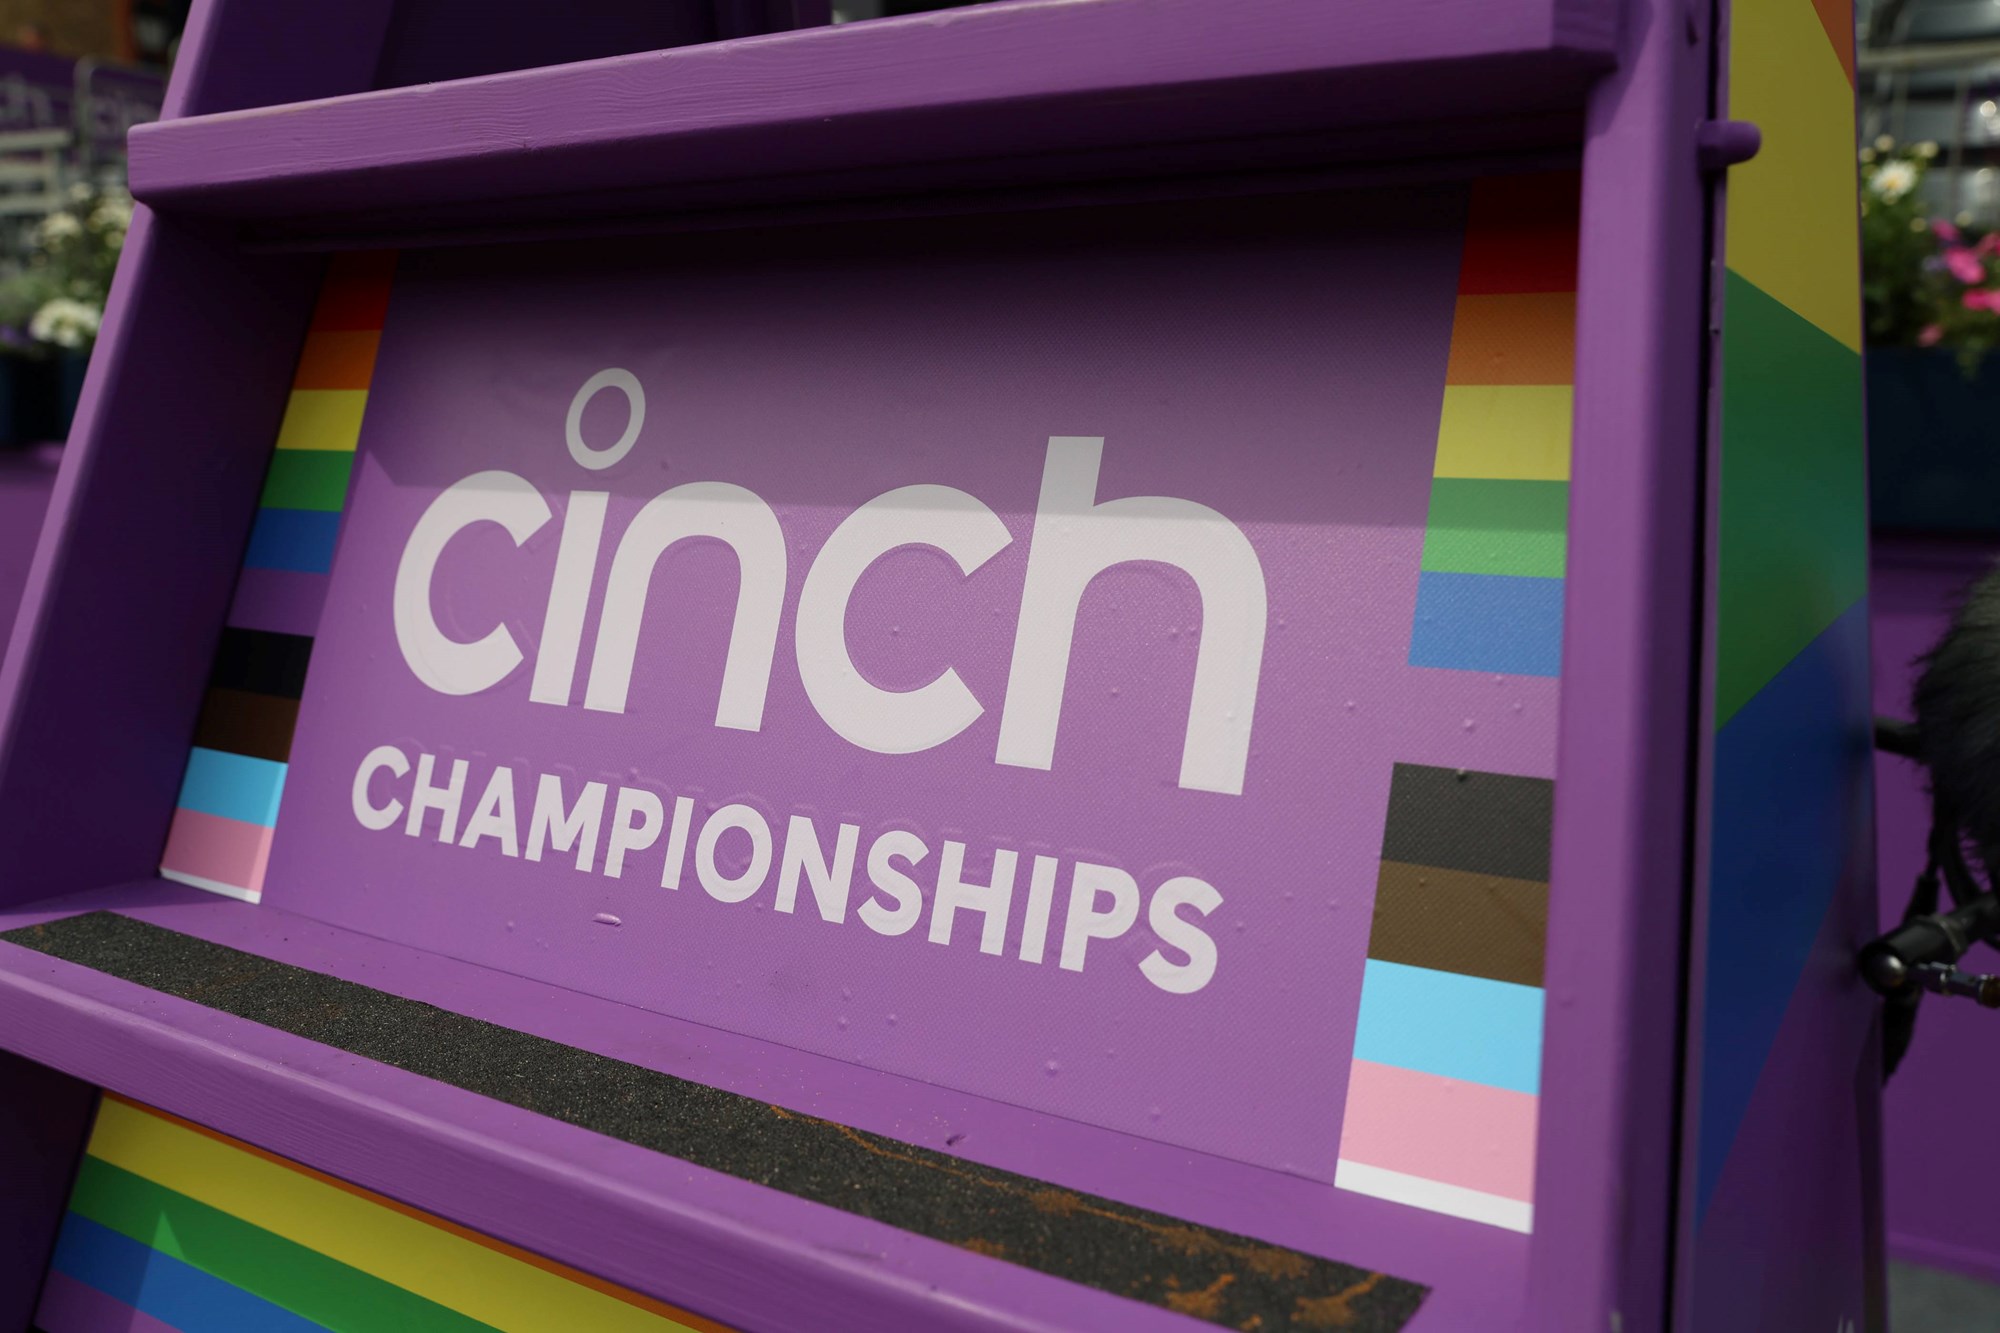 cinch Championships sign with Pride branding